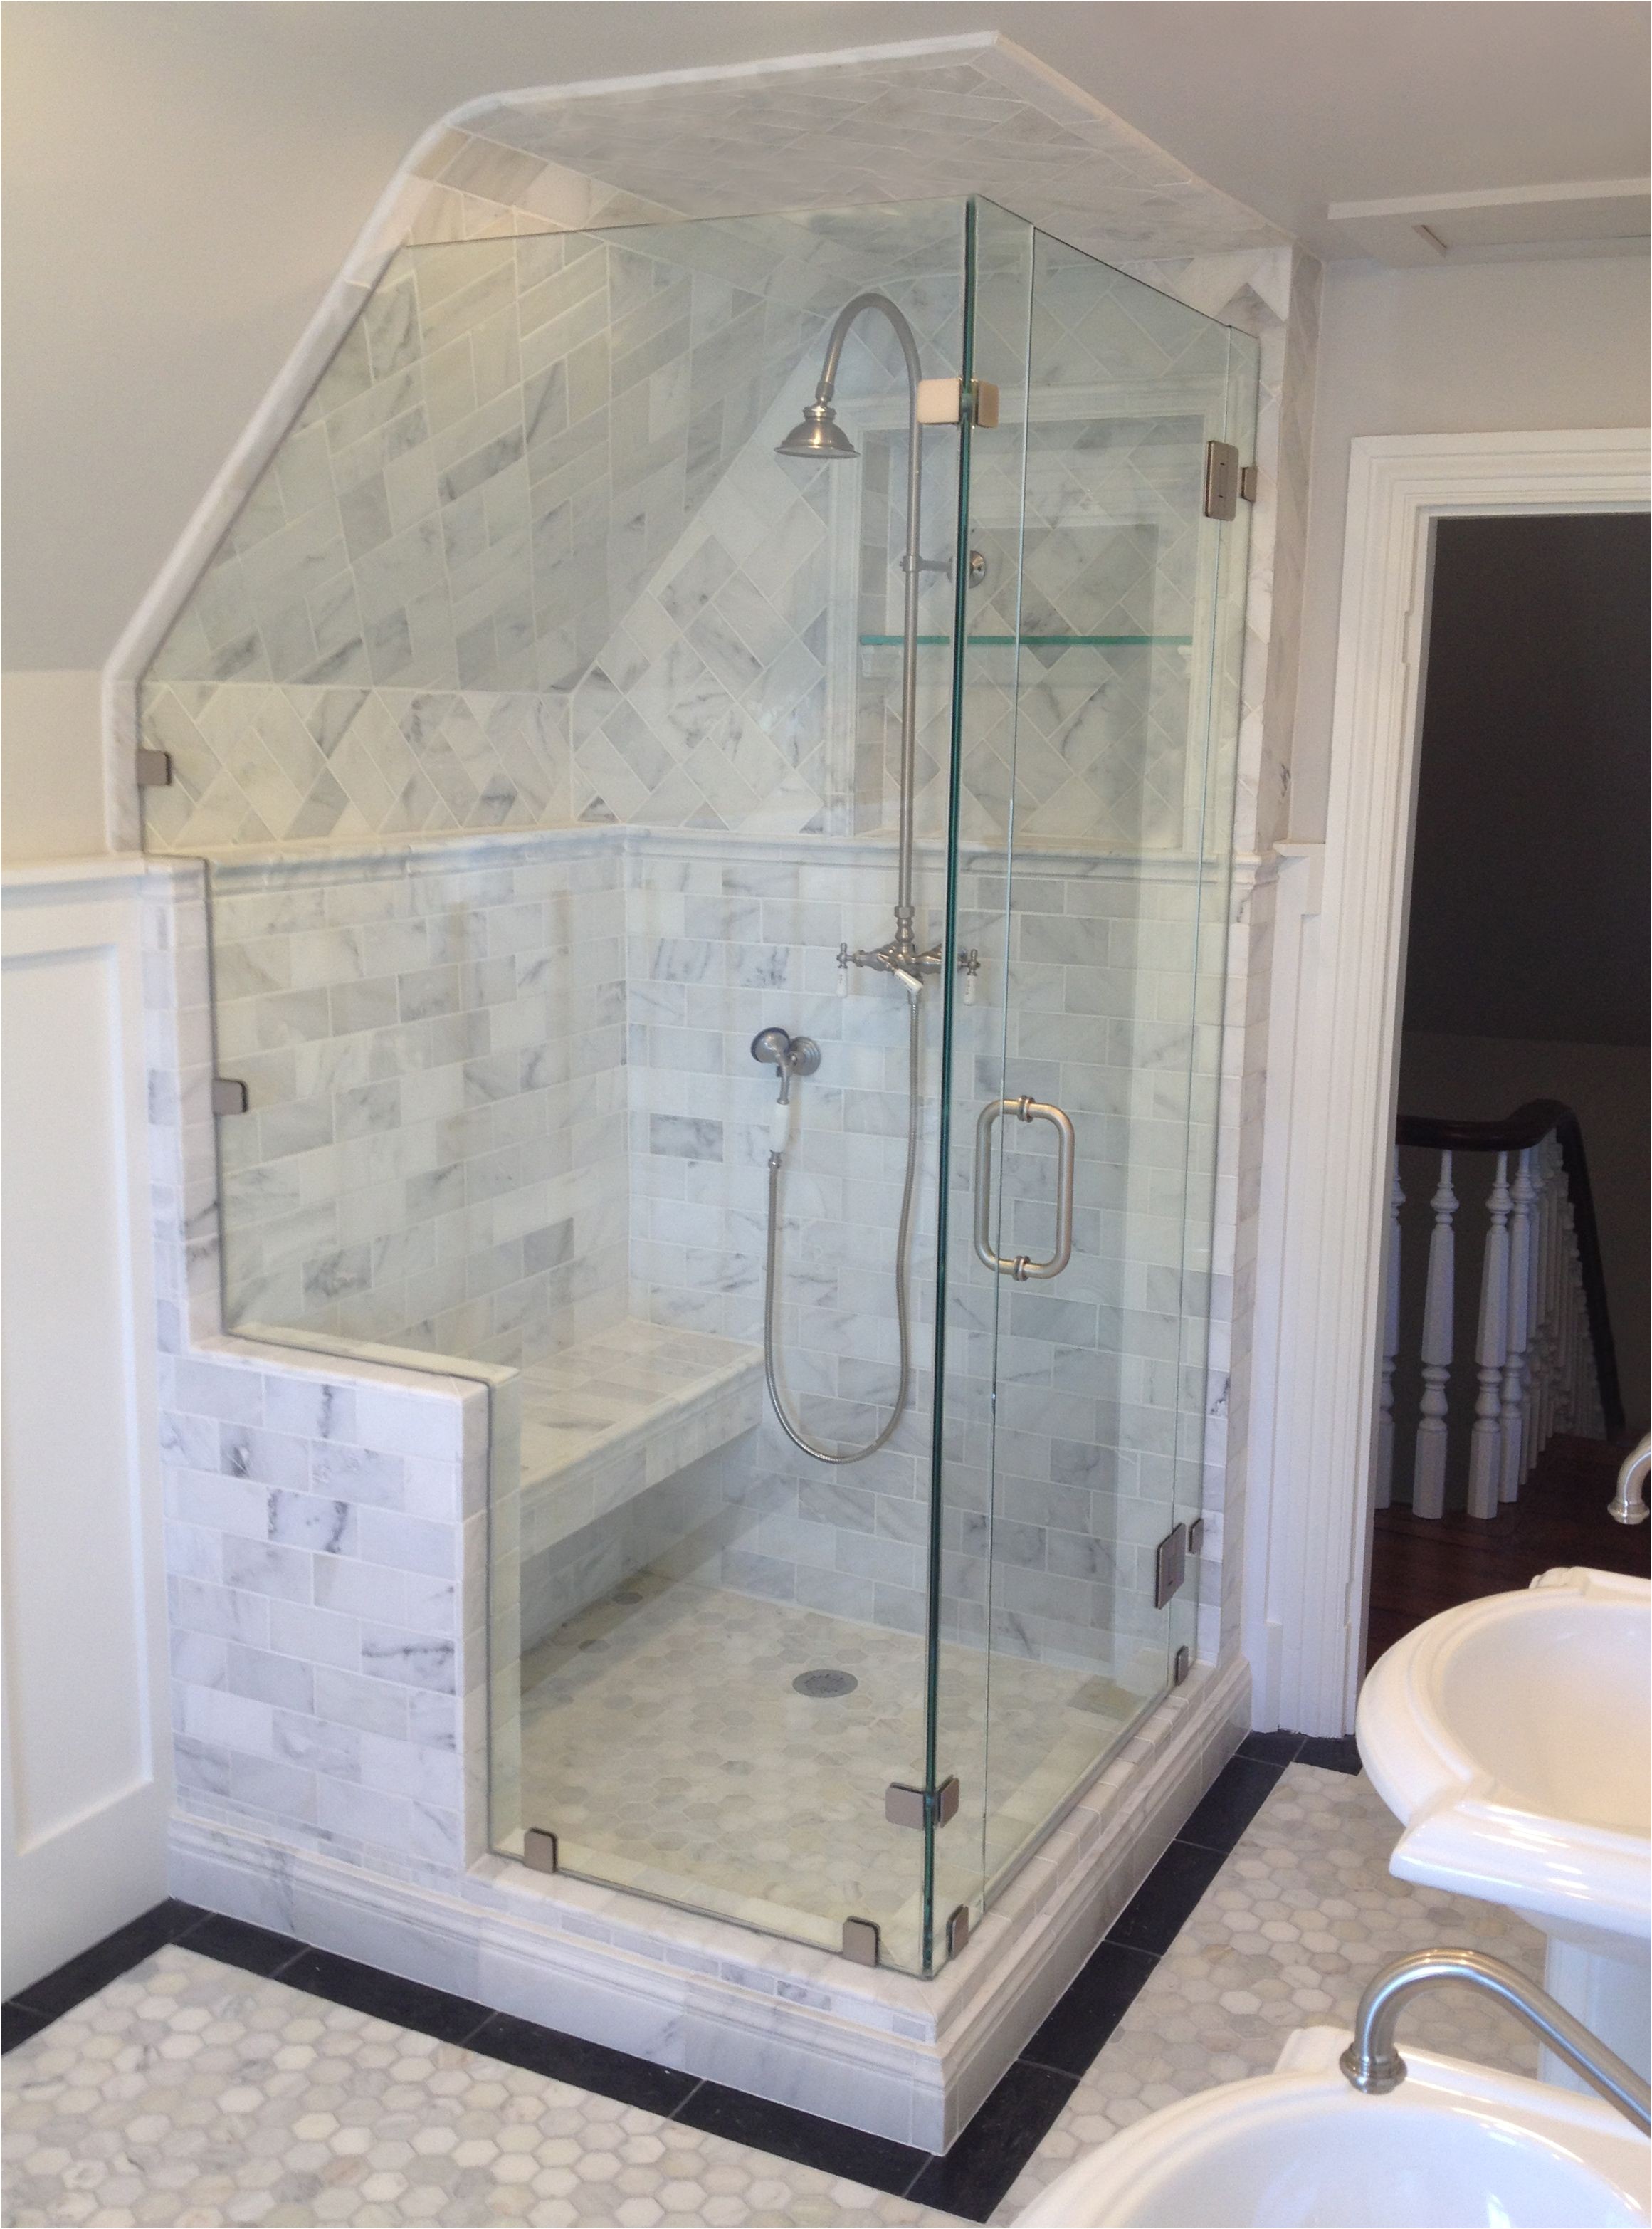 showerguard glass the industry s first permanent shower glass protection product preserves the glass from stains caused by hard water heat